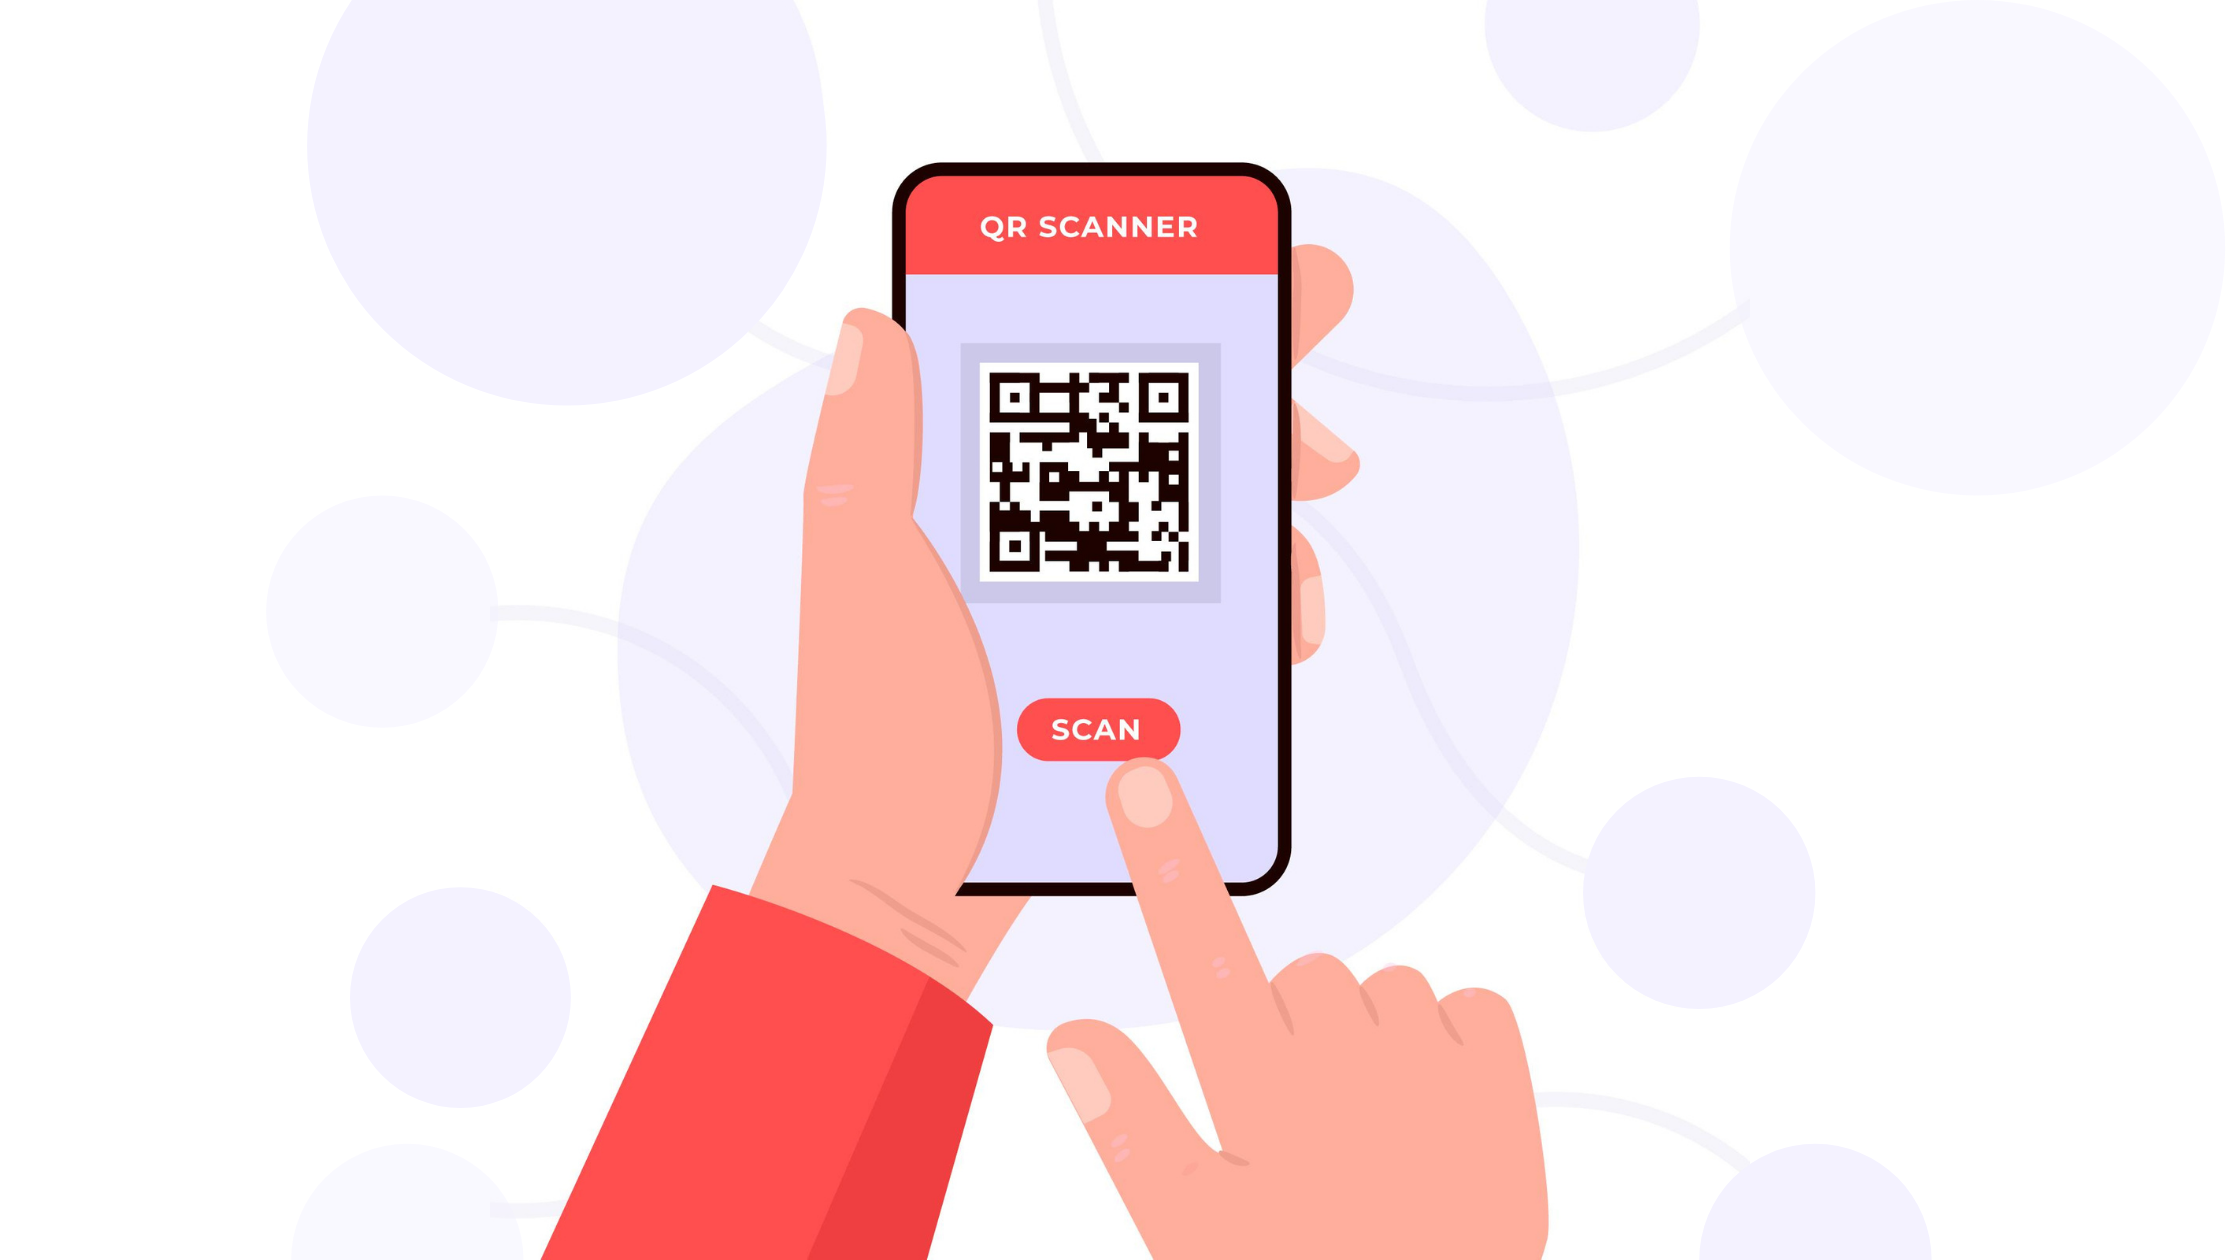 Informar asistente reserva QR Code Scanner Online Without App (With Camera & Image) For Free!